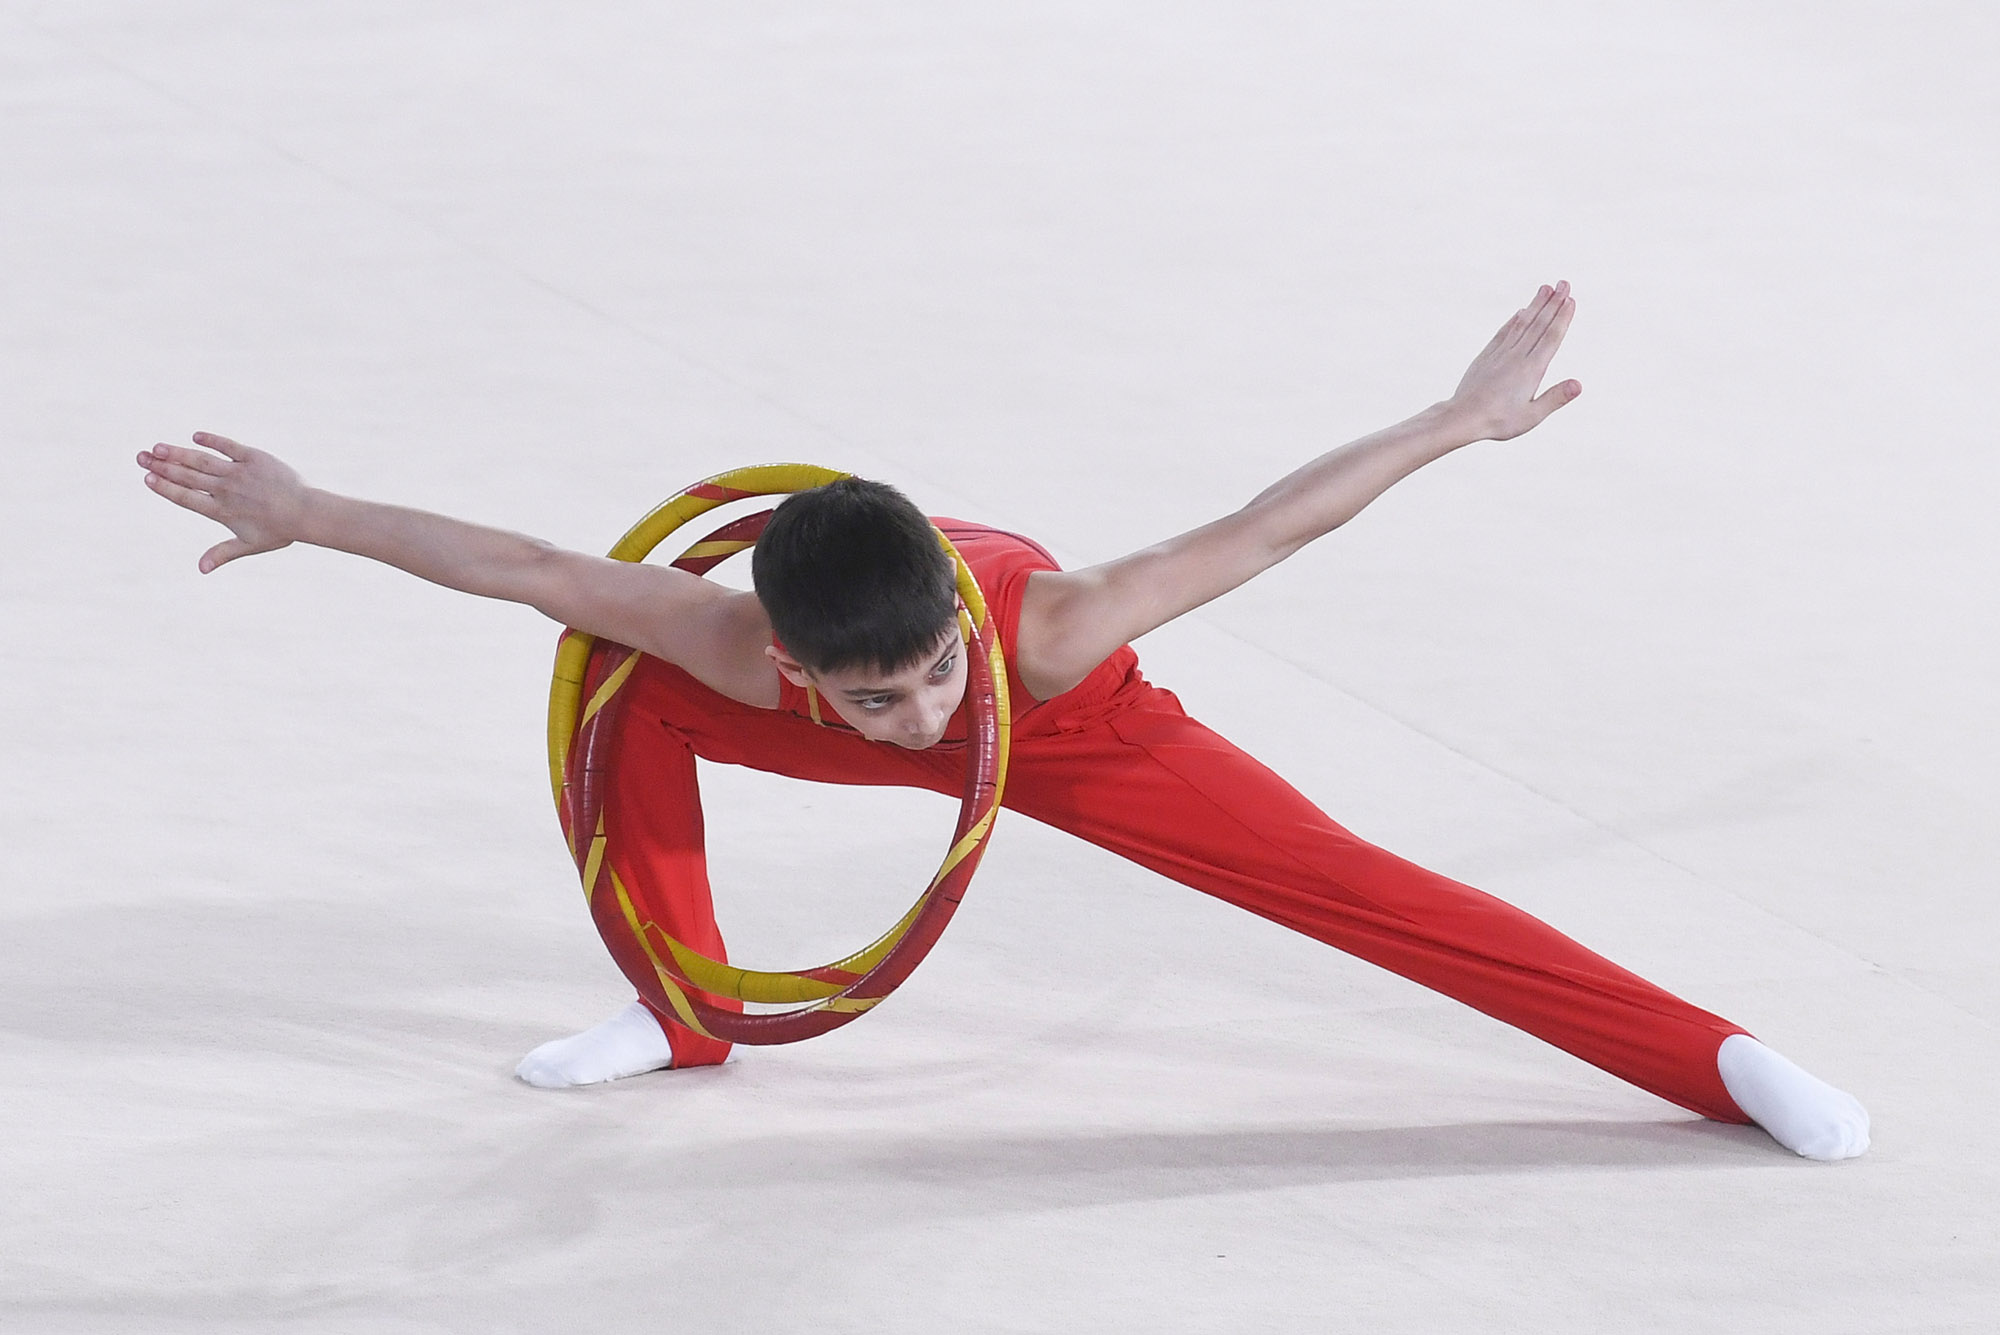 Artistic, rhythmic gymnastics require different strengths – The